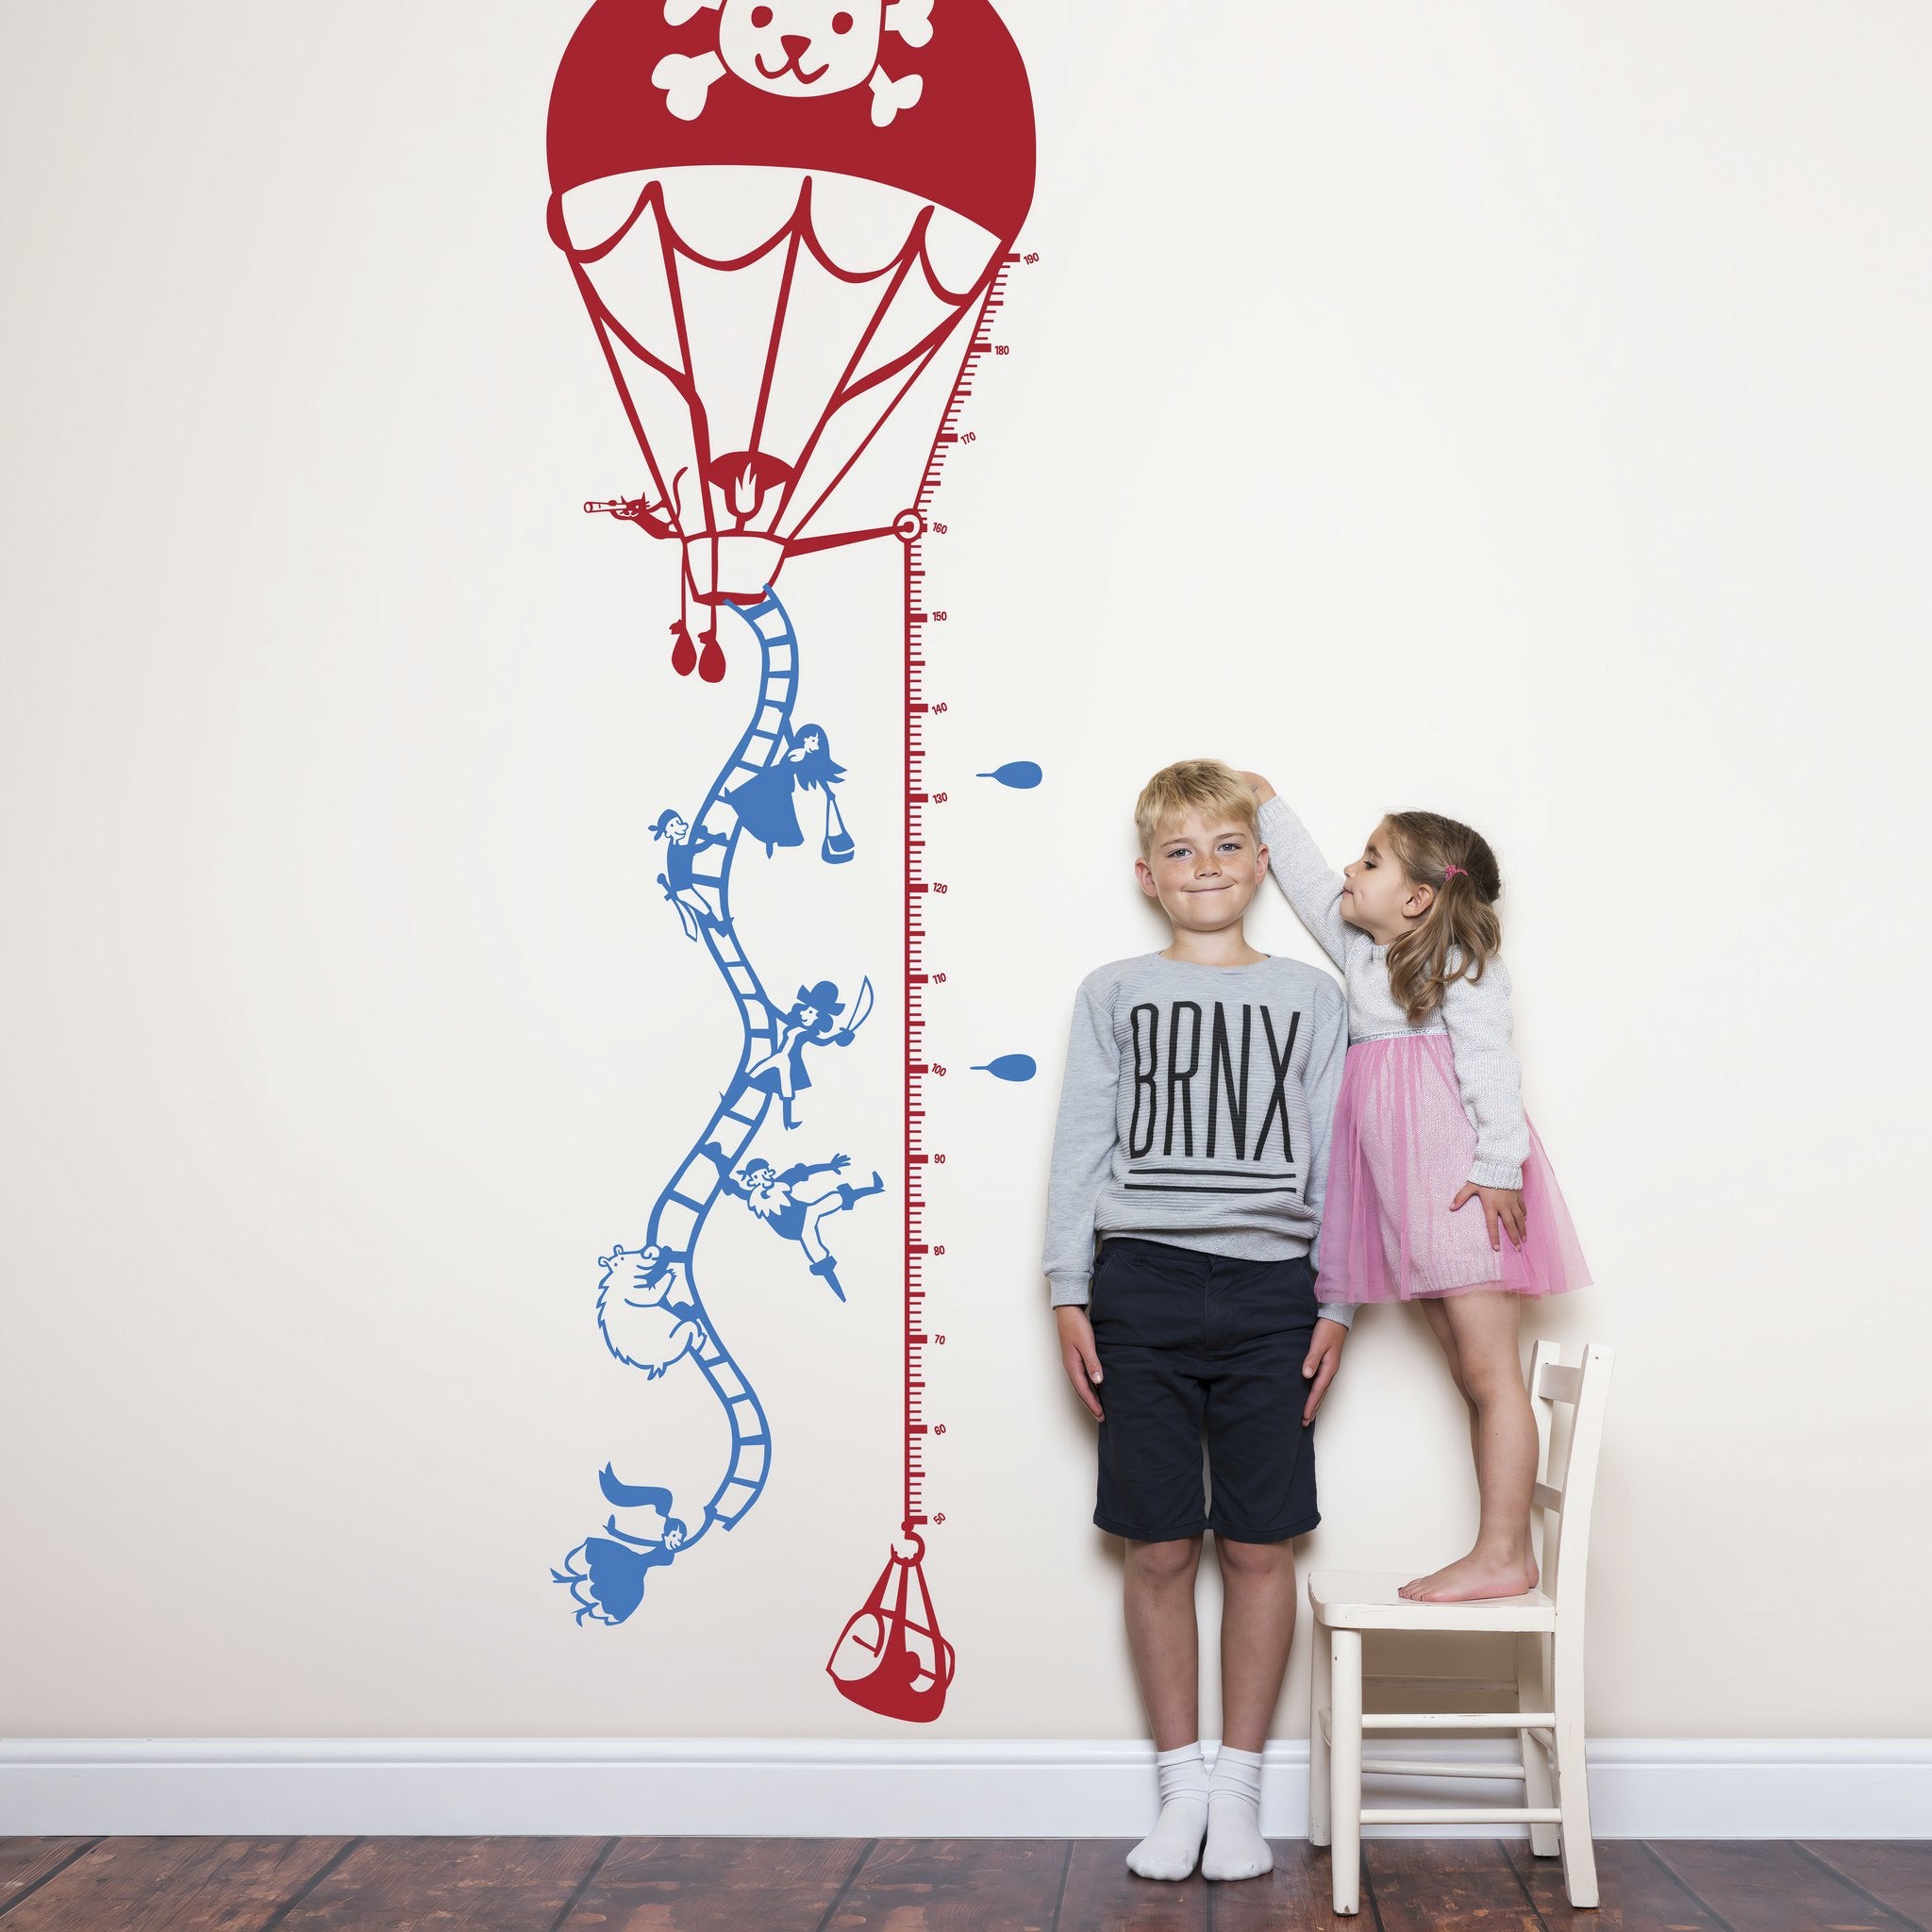 Height chart wall sticker of a hot air balloon taking off with a young boy and girl nearby.